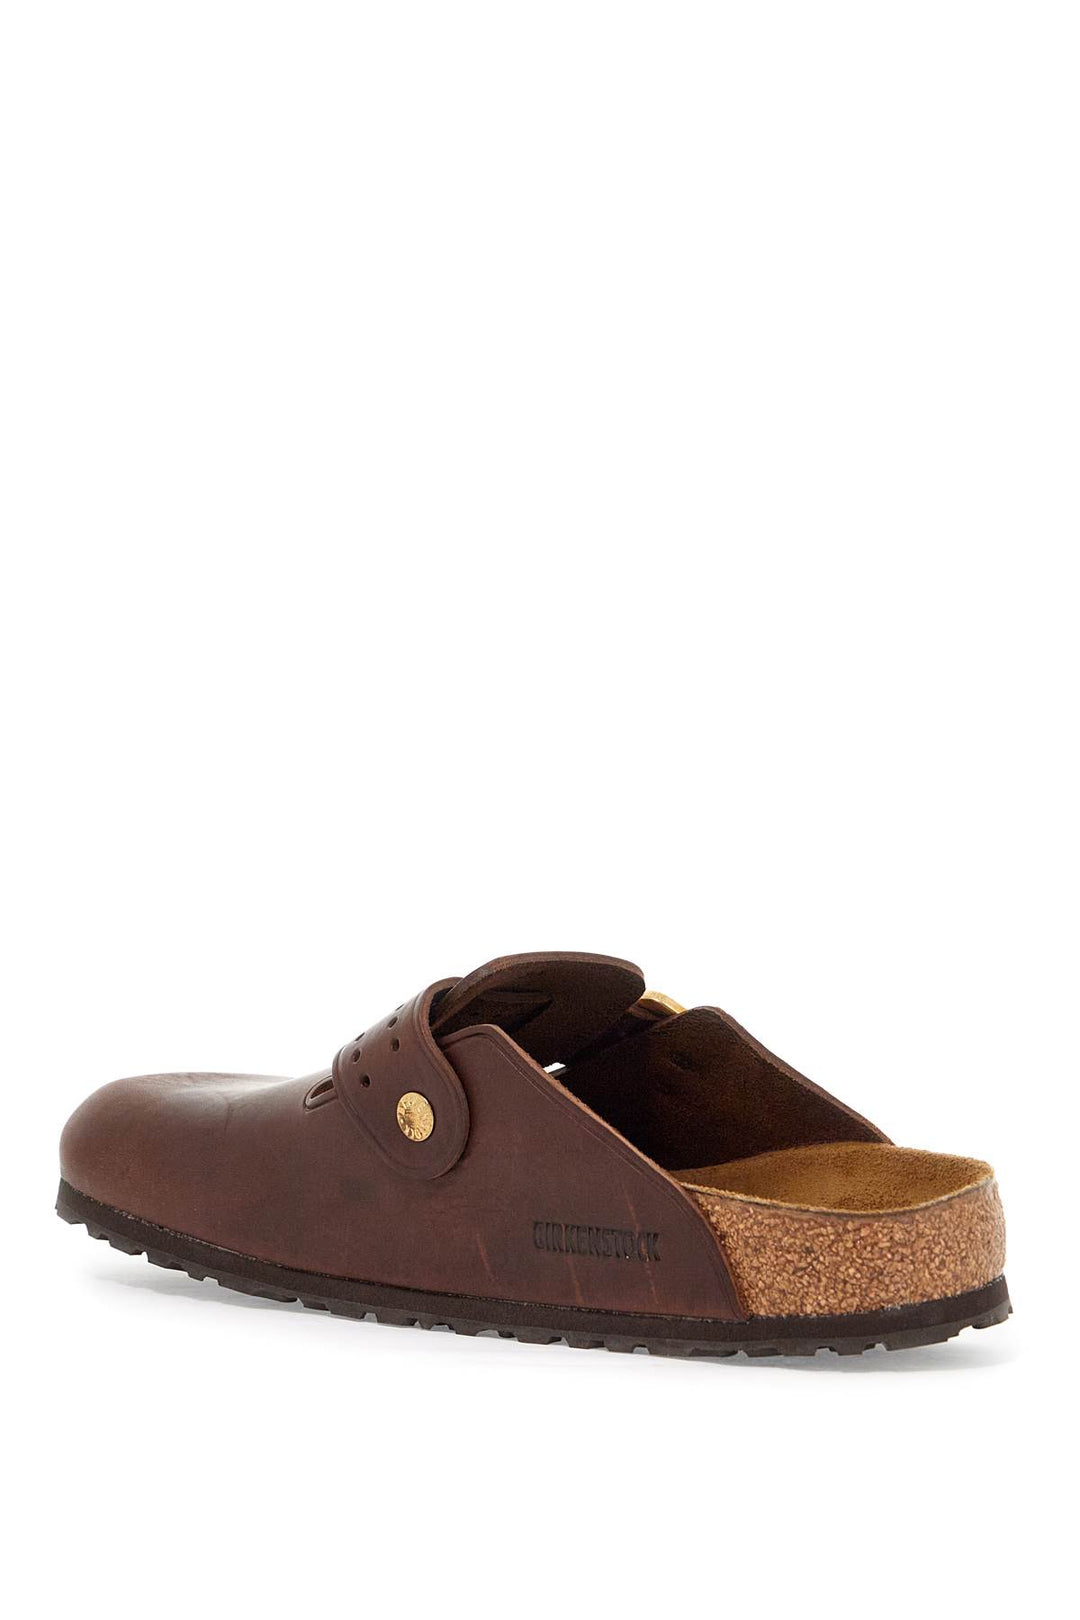 Birkenstock Boston Bold Leather Clog With Sab   Brown